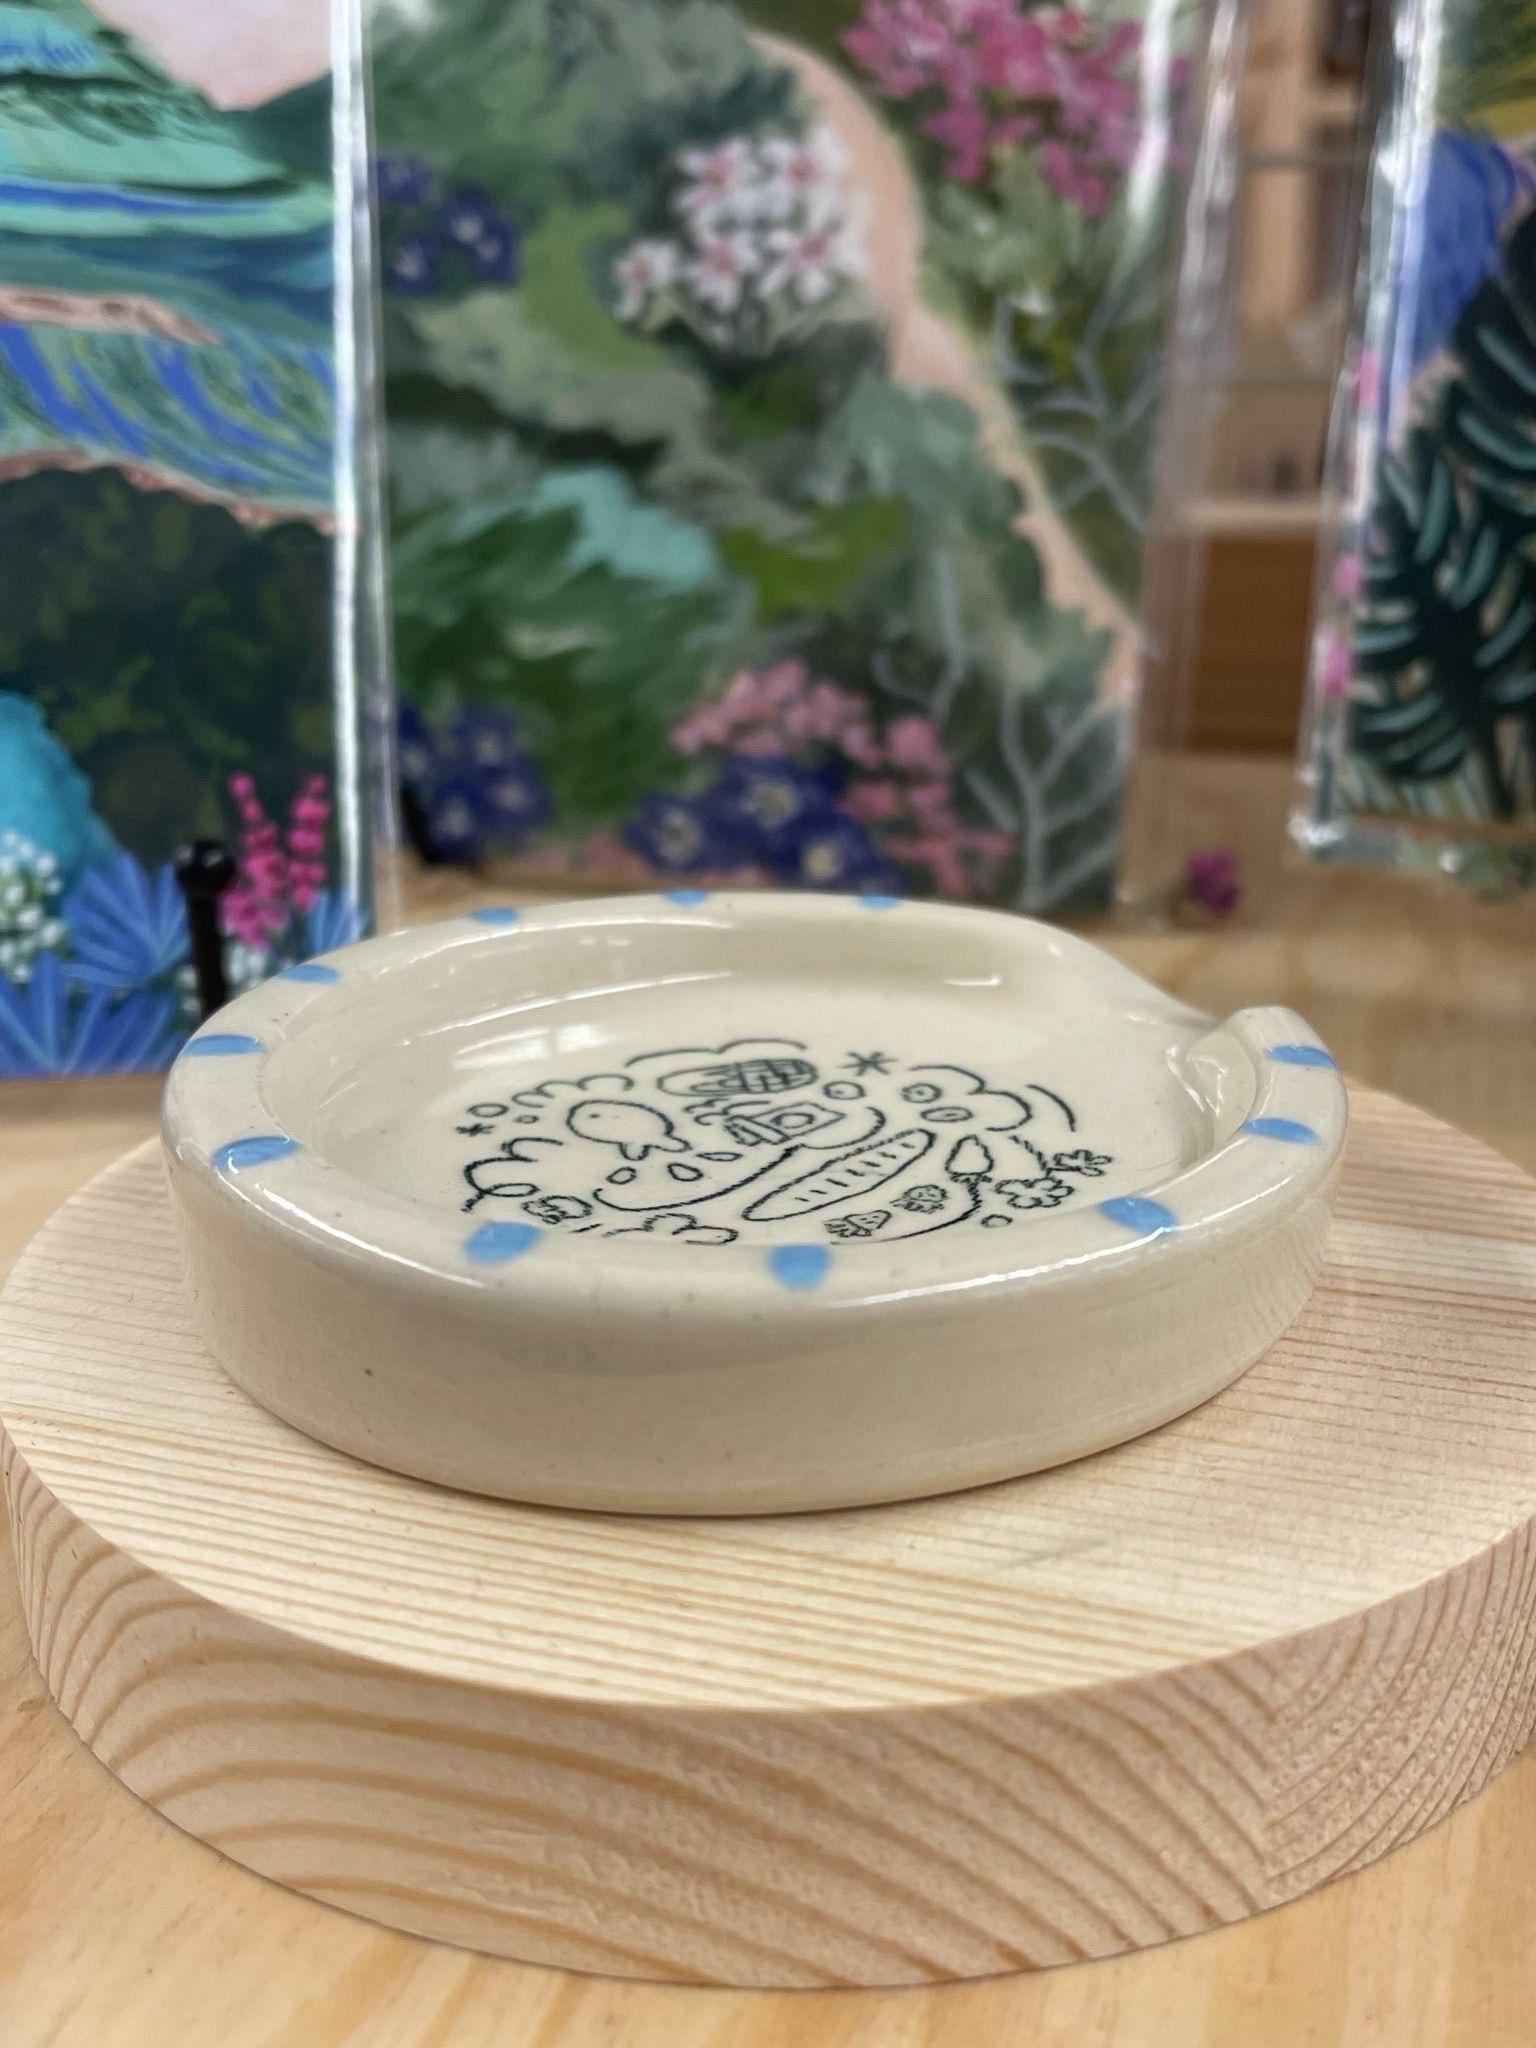 This spoon rest has an adorable cartoon doodle in the center. Makers mark on the bottom. Little Oakie Studios is a Seattle based company specializing in Kawaii inspired design. Every piece is Handmade, with Slight variation natural to the process of